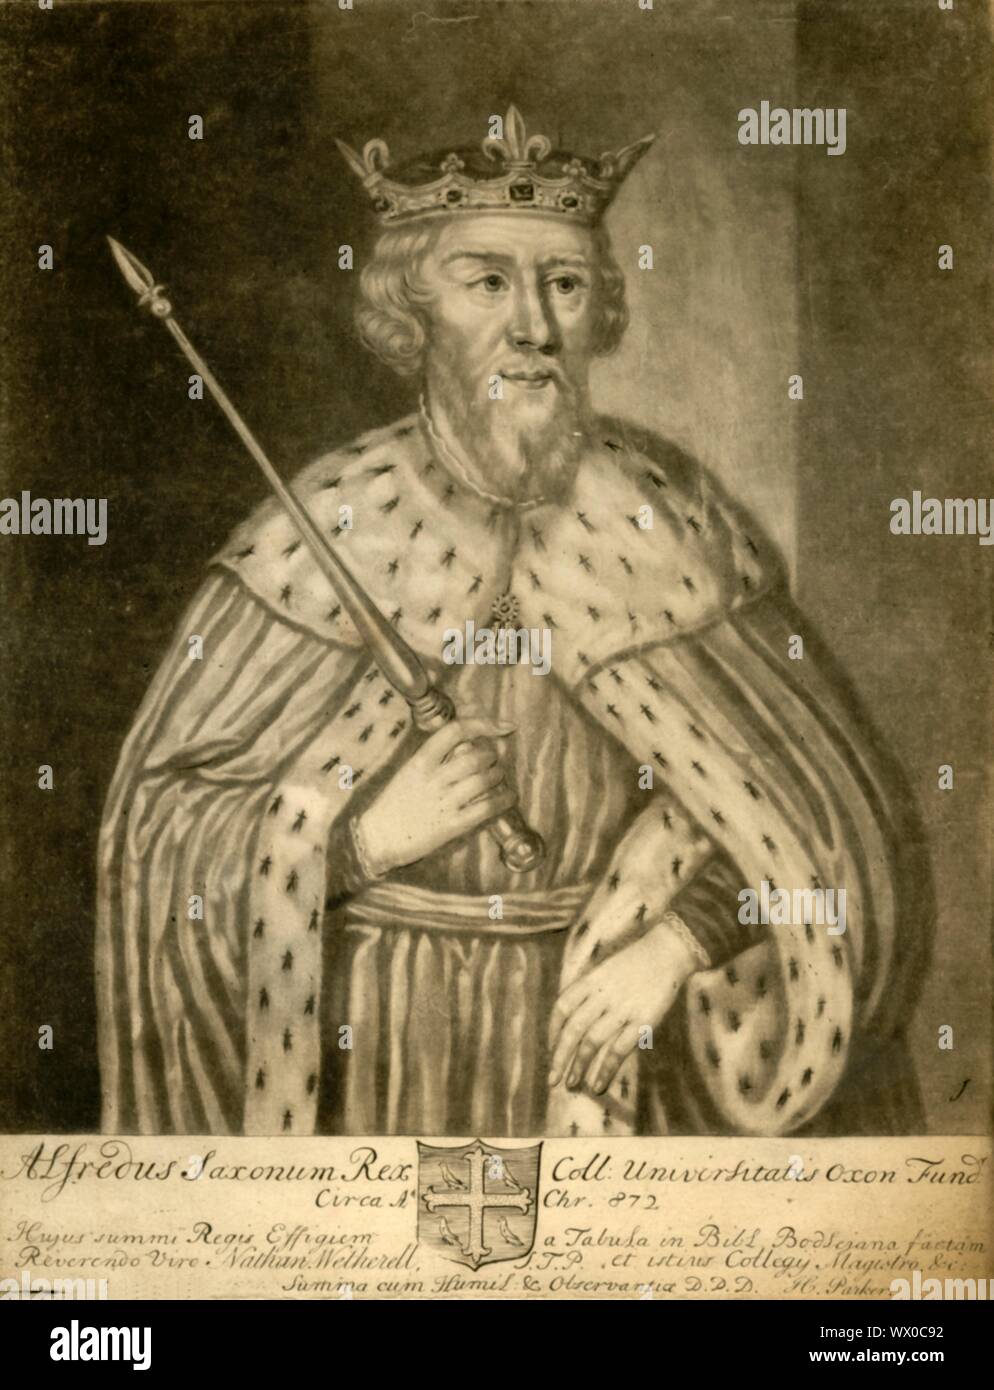 Alfred the Great, 1712. Portrait of Alfred wearing a crown and ermine robes, and holding a sceptre. King Alfred (849-899 AD) was King of Wessex from 871 to c886, and King of the Anglo-Saxons from c886 to 899. The text below refers to his founding of University College Oxford, but the college was actually founded by William of Durham, who died in 1249. After a painting in the Bodleian Gallery. [Henry Parker, London, 1712] Stock Photo